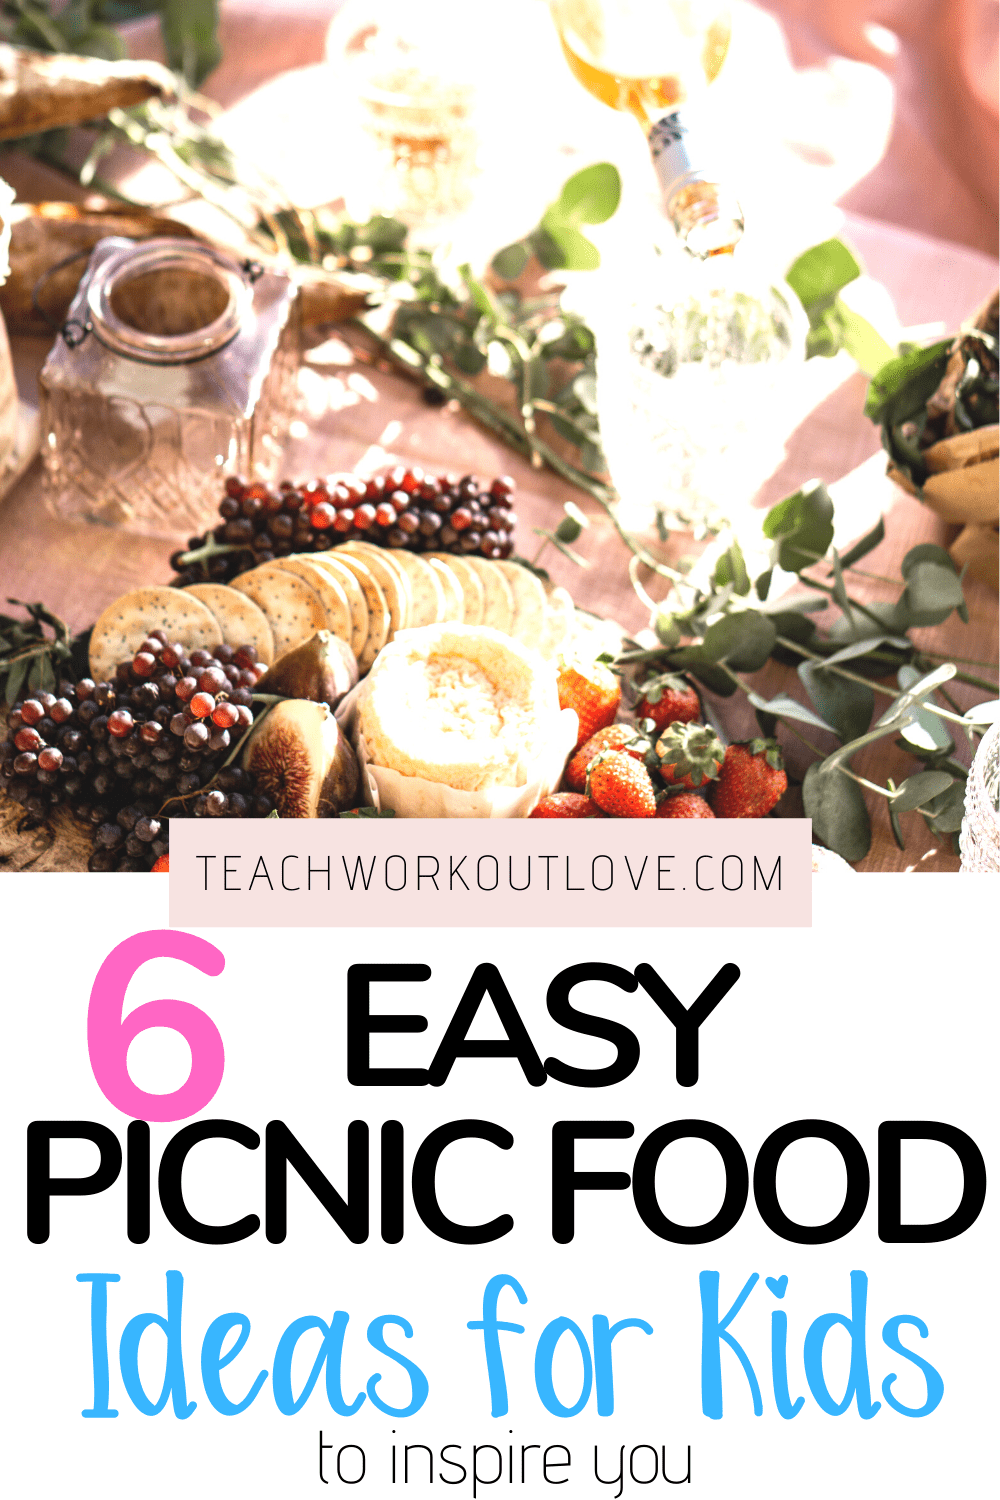 Picnics are meant to be easy, breezy fun, but can be tough sometimes. Check out a few of our favorite picnic food ideas for kids to help you out!